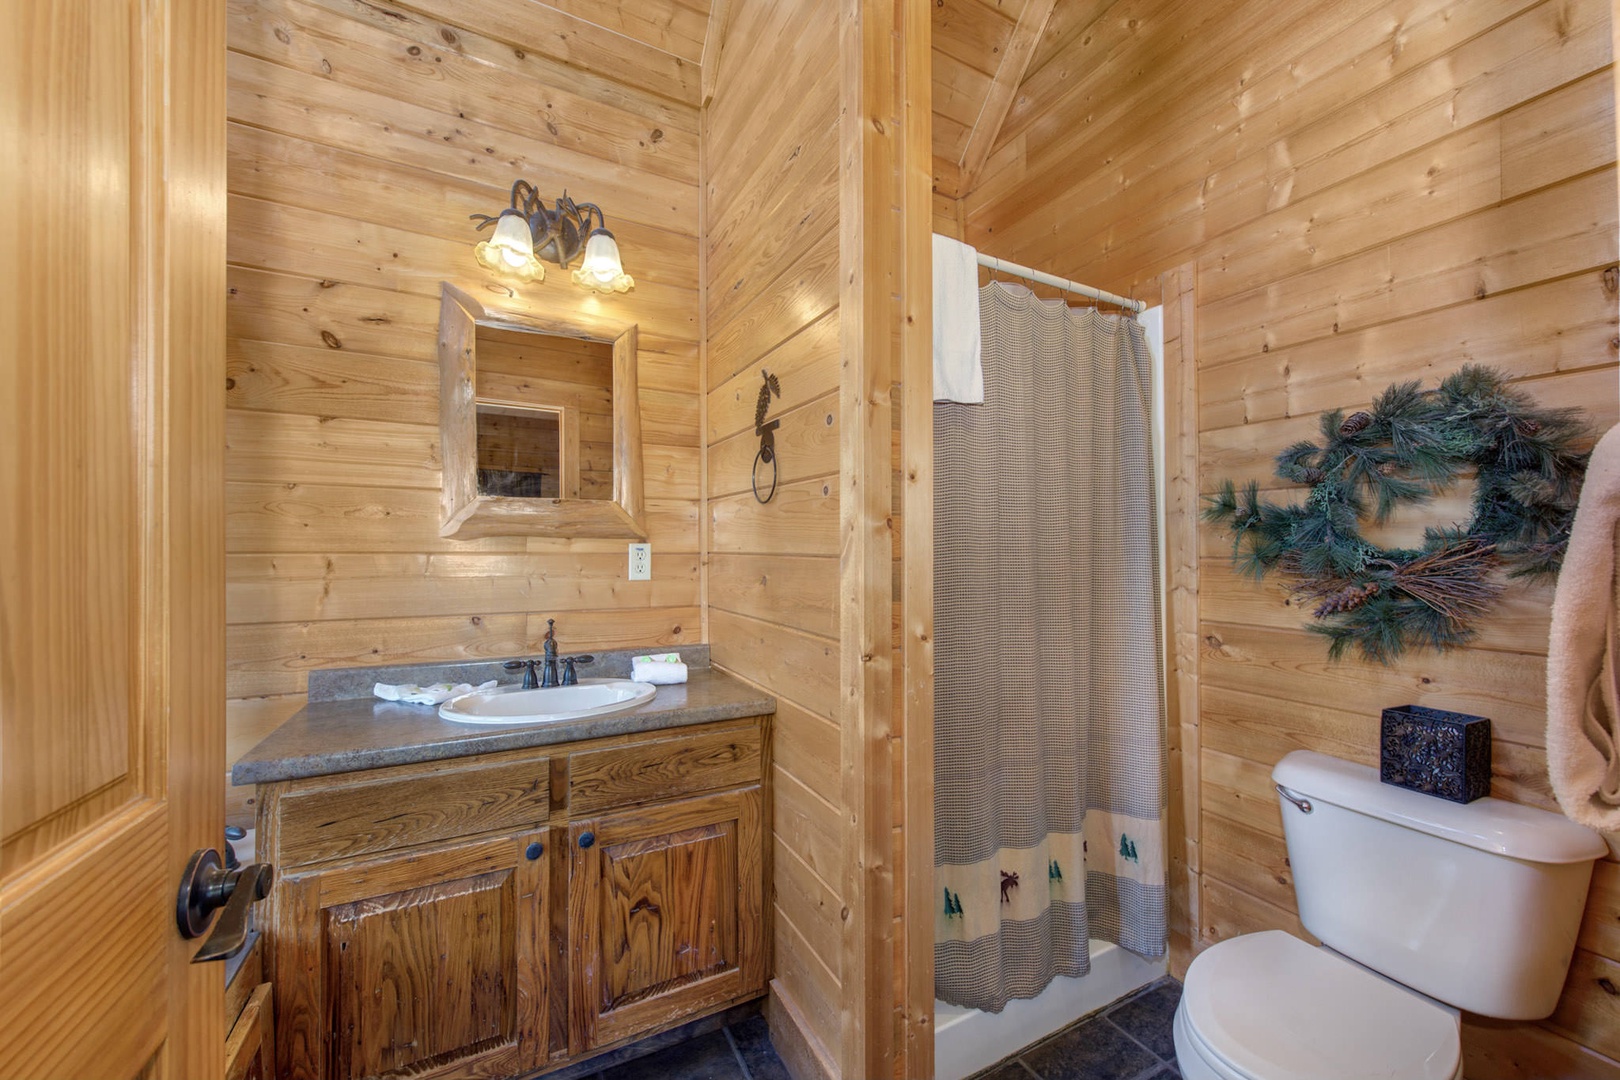 Bathroom 3 with stand up shower, and separate soaking tub